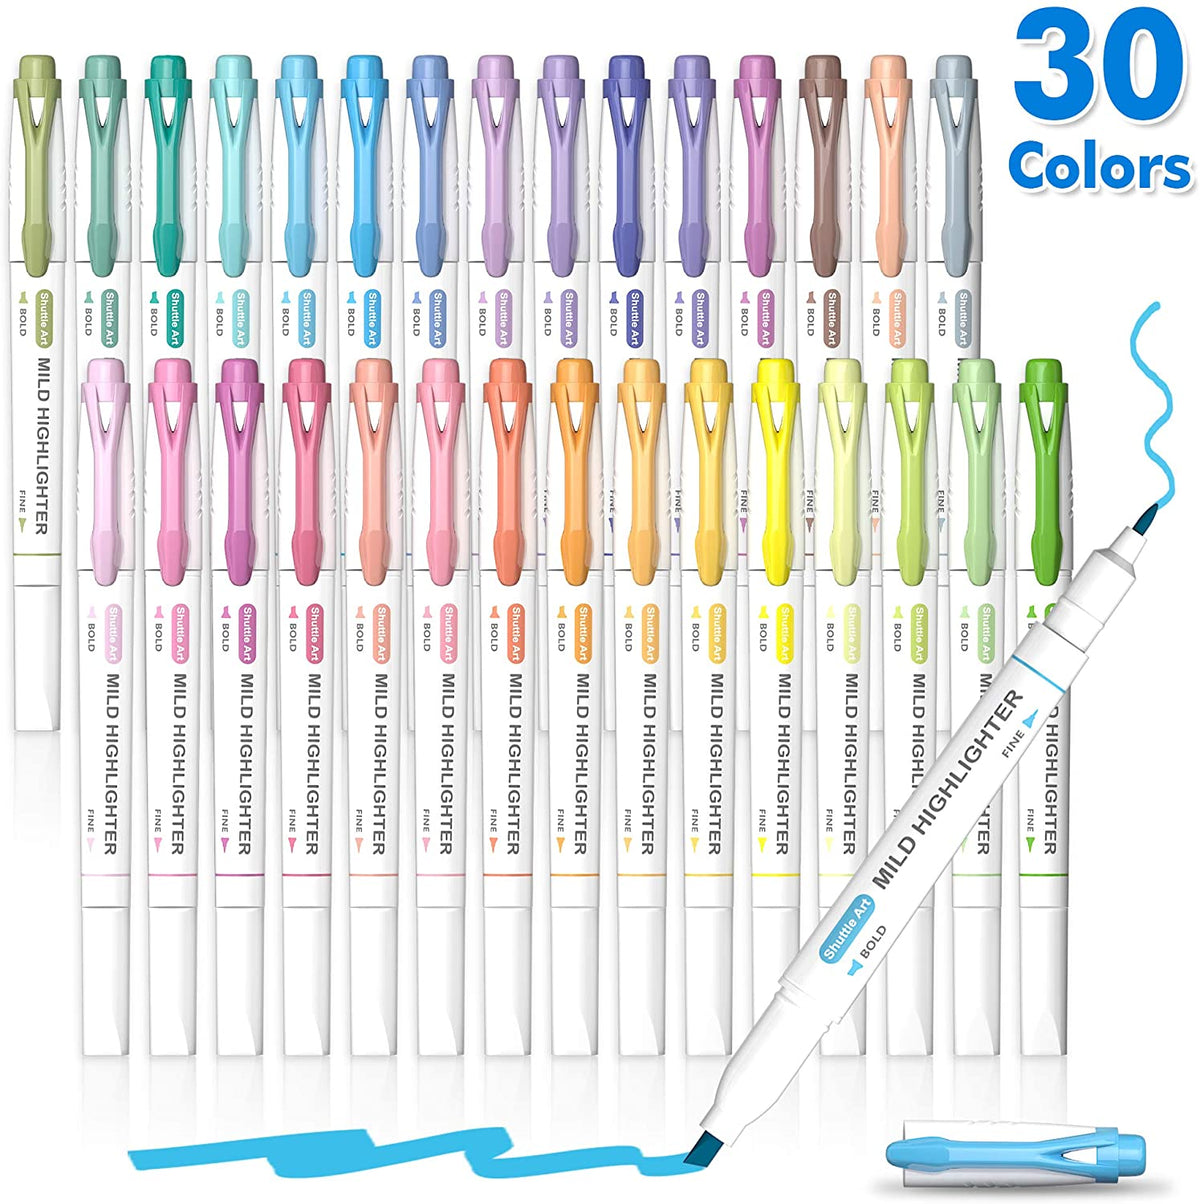 Gel Highlighters, 8 bright Colors - Set of 16 — Shuttle Art